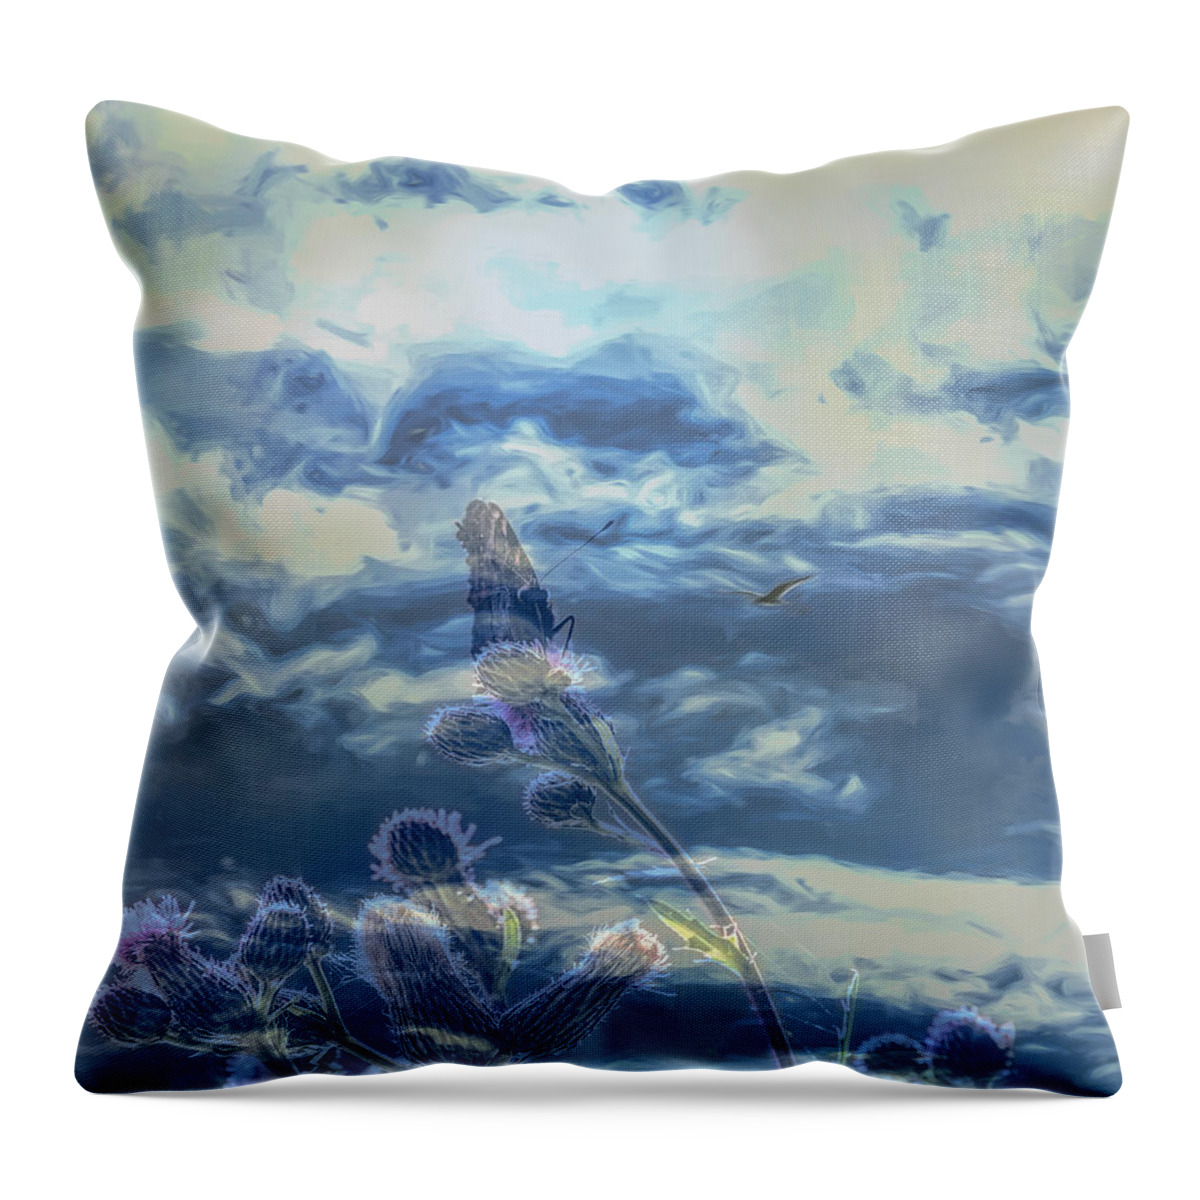 Spooky Throw Pillow featuring the photograph Spooky by Leif Sohlman